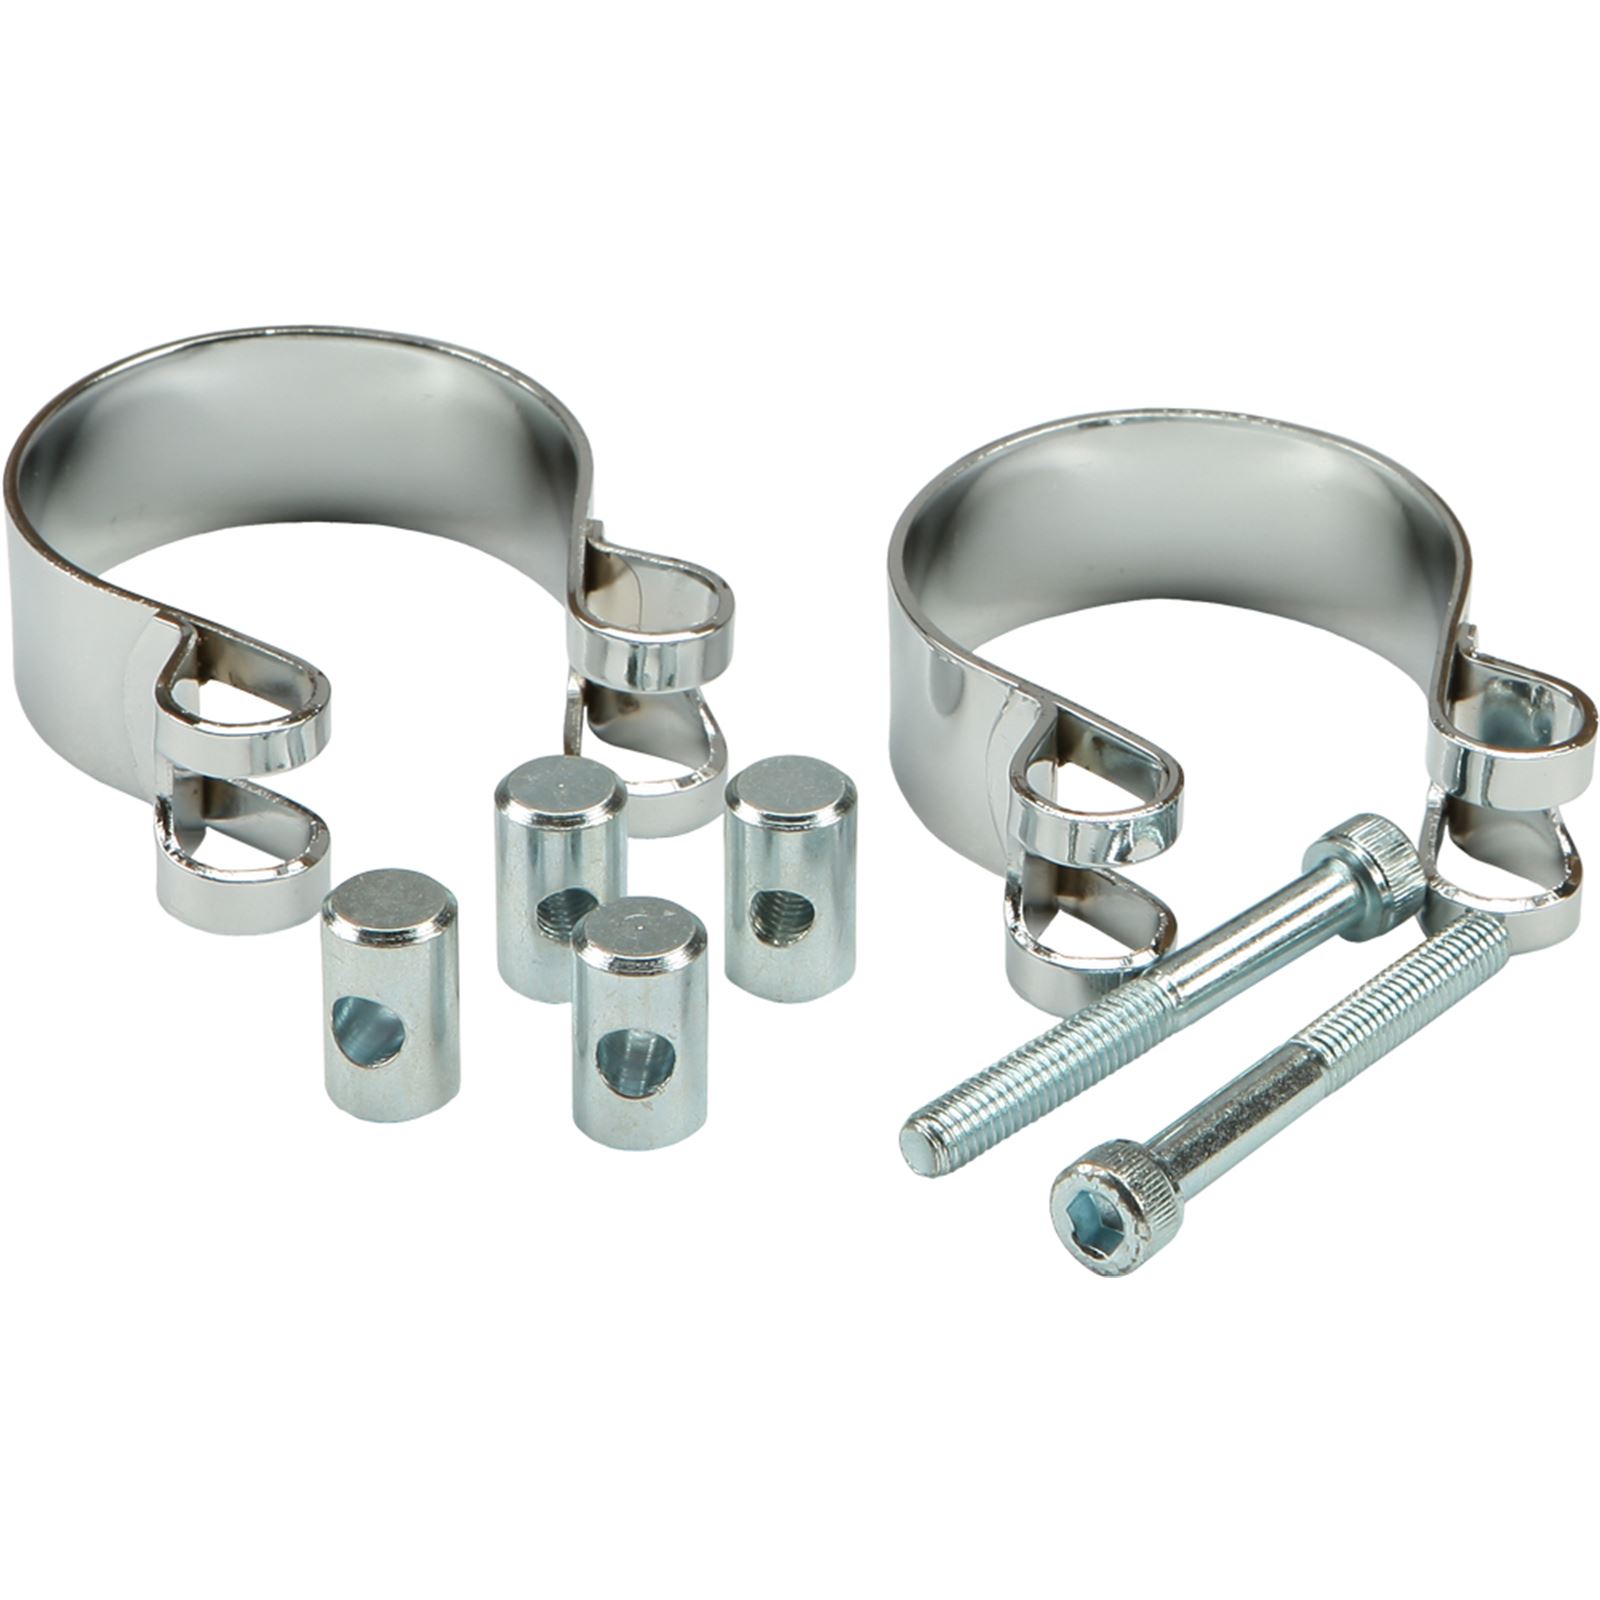 Harddrive Exhaust Clamps